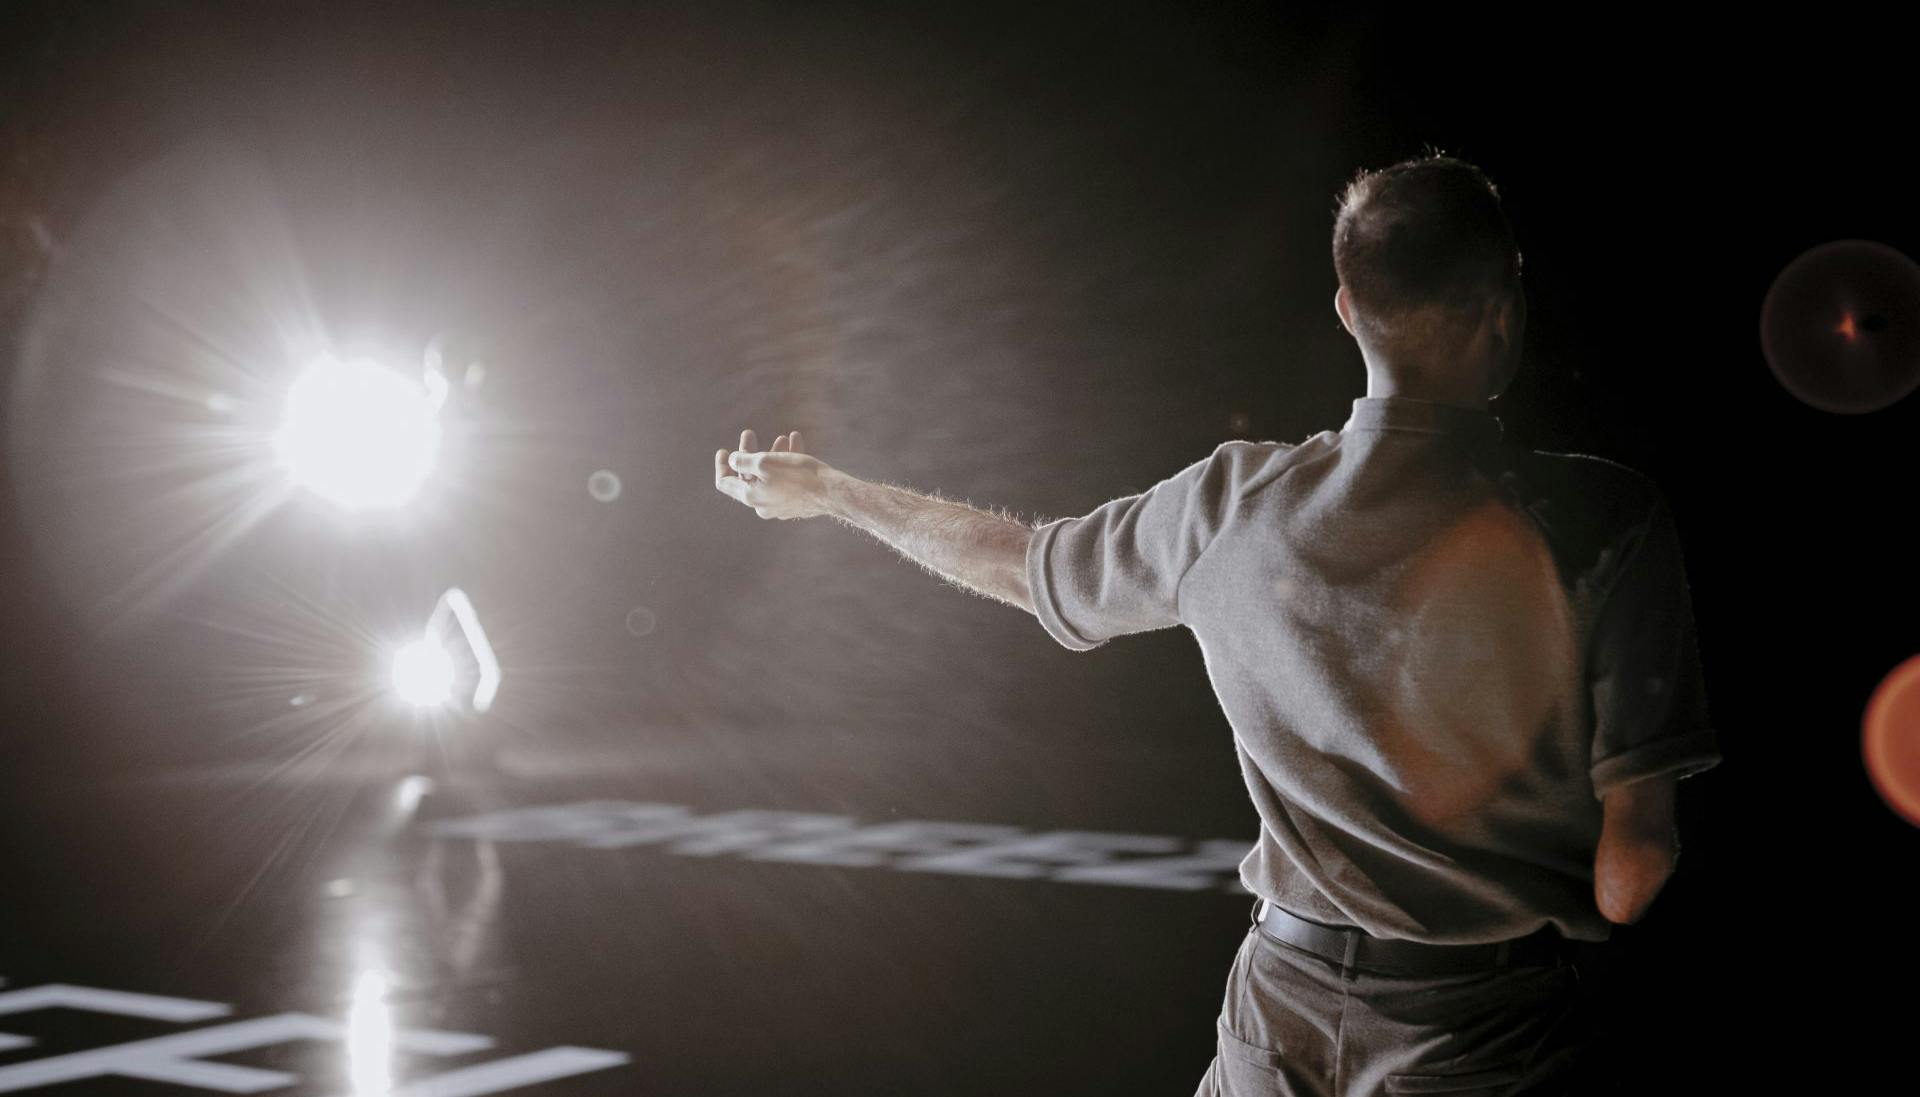 On the stage, from behind, a dancer without a forearm. He is illuminated by a spotlight turned towards the camera.